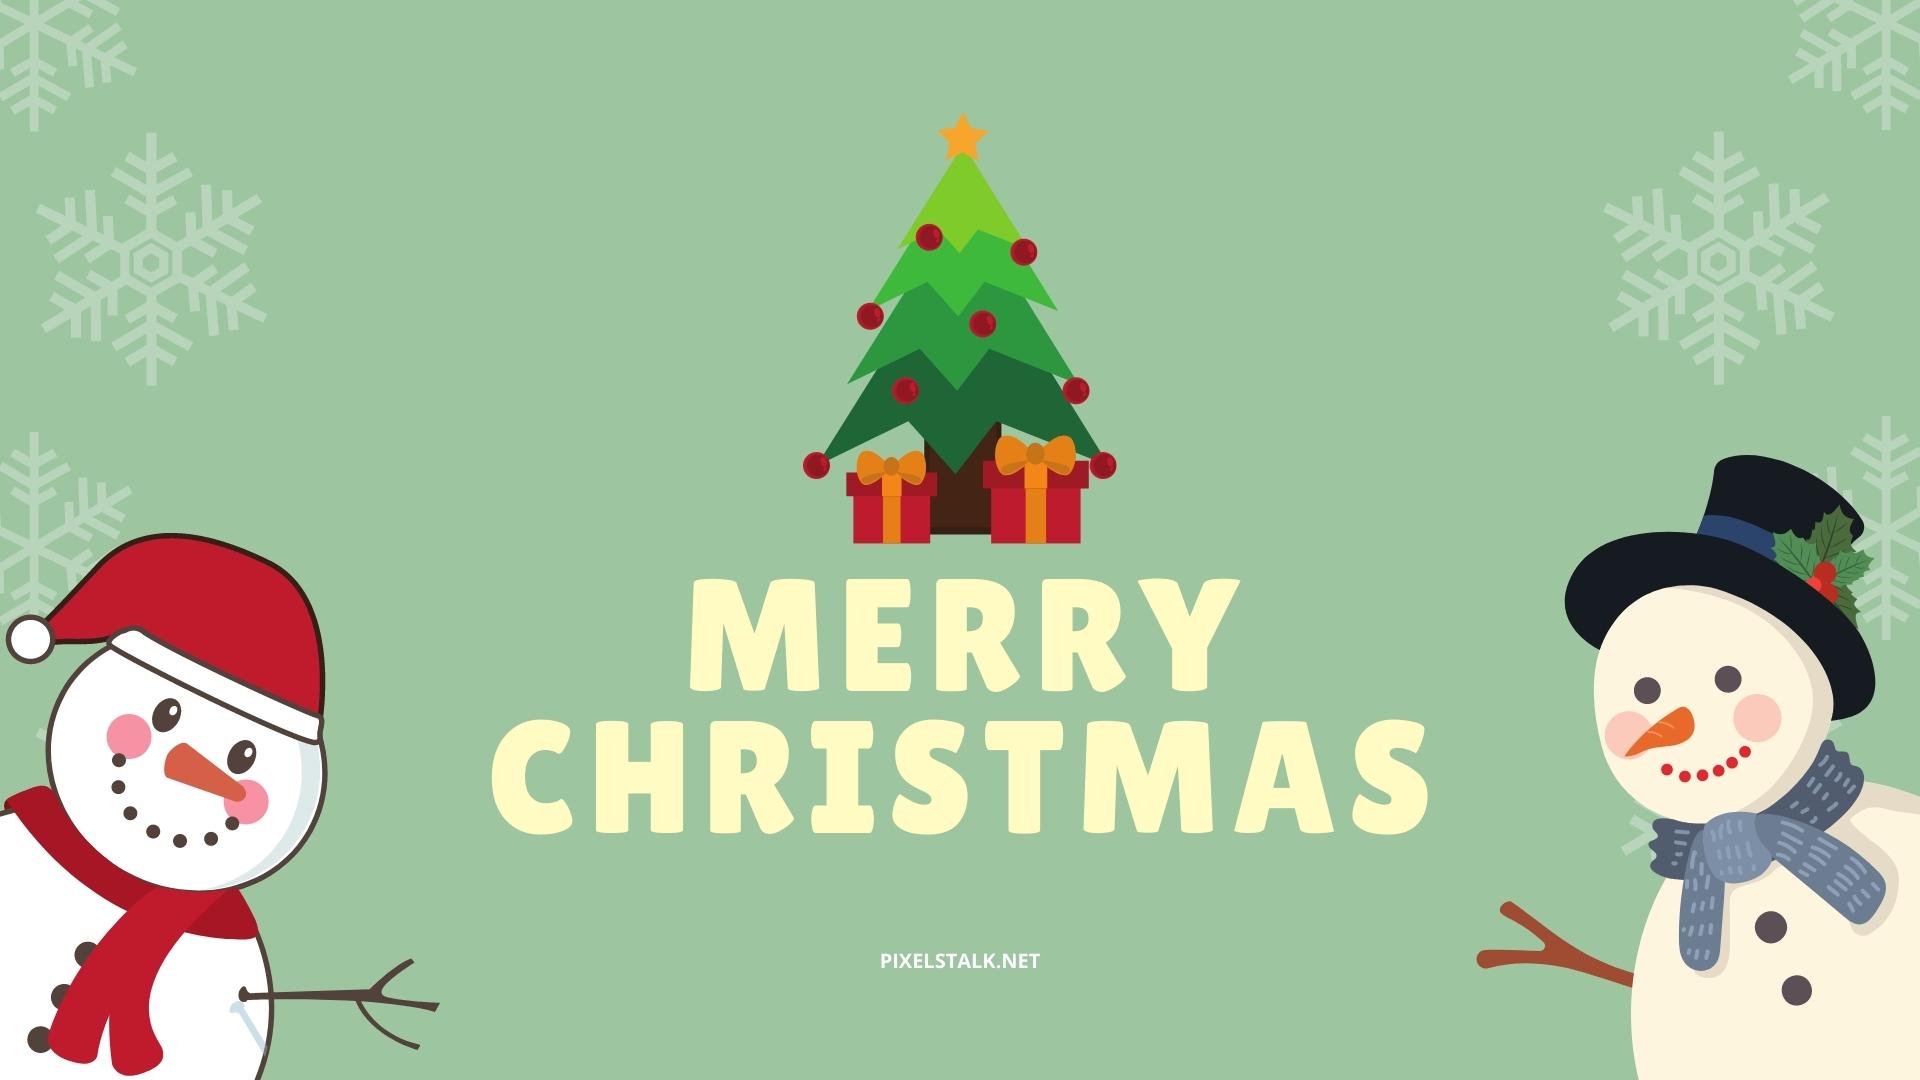 Merry Christmas Wallpaper HD free download